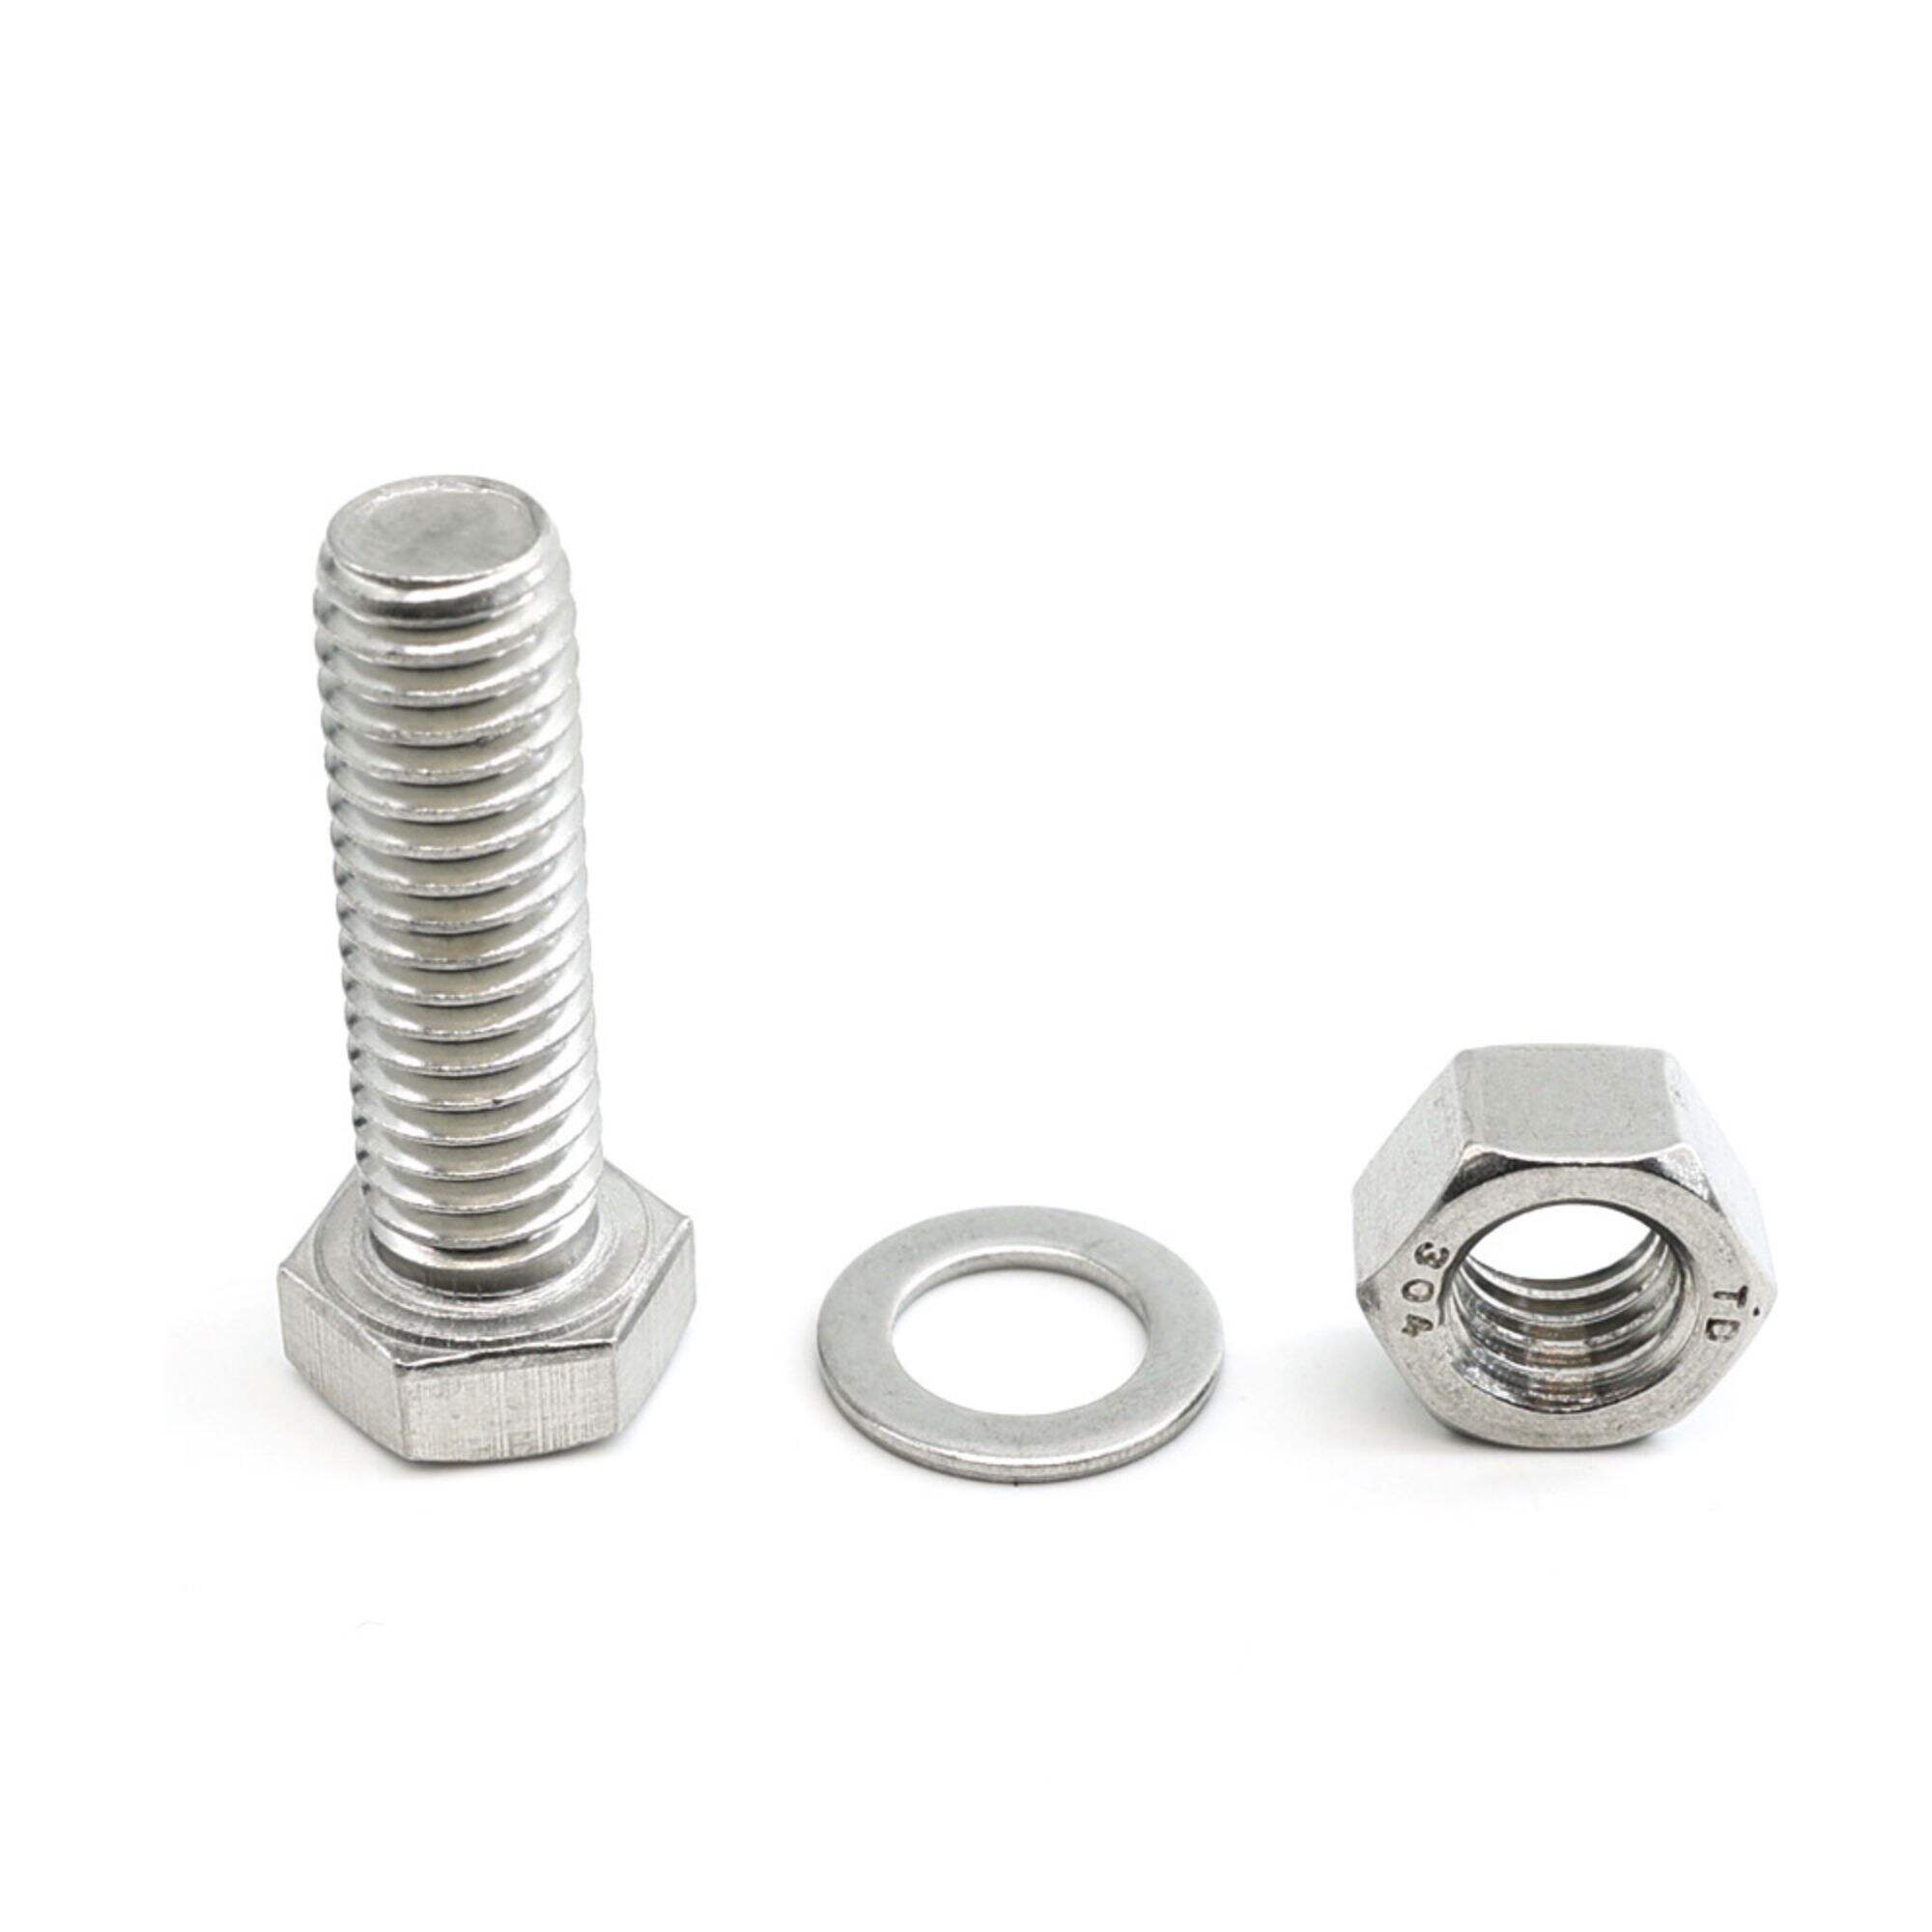 18-8 Stainless Steel Hex Head Cap Screw with Nut and Washer